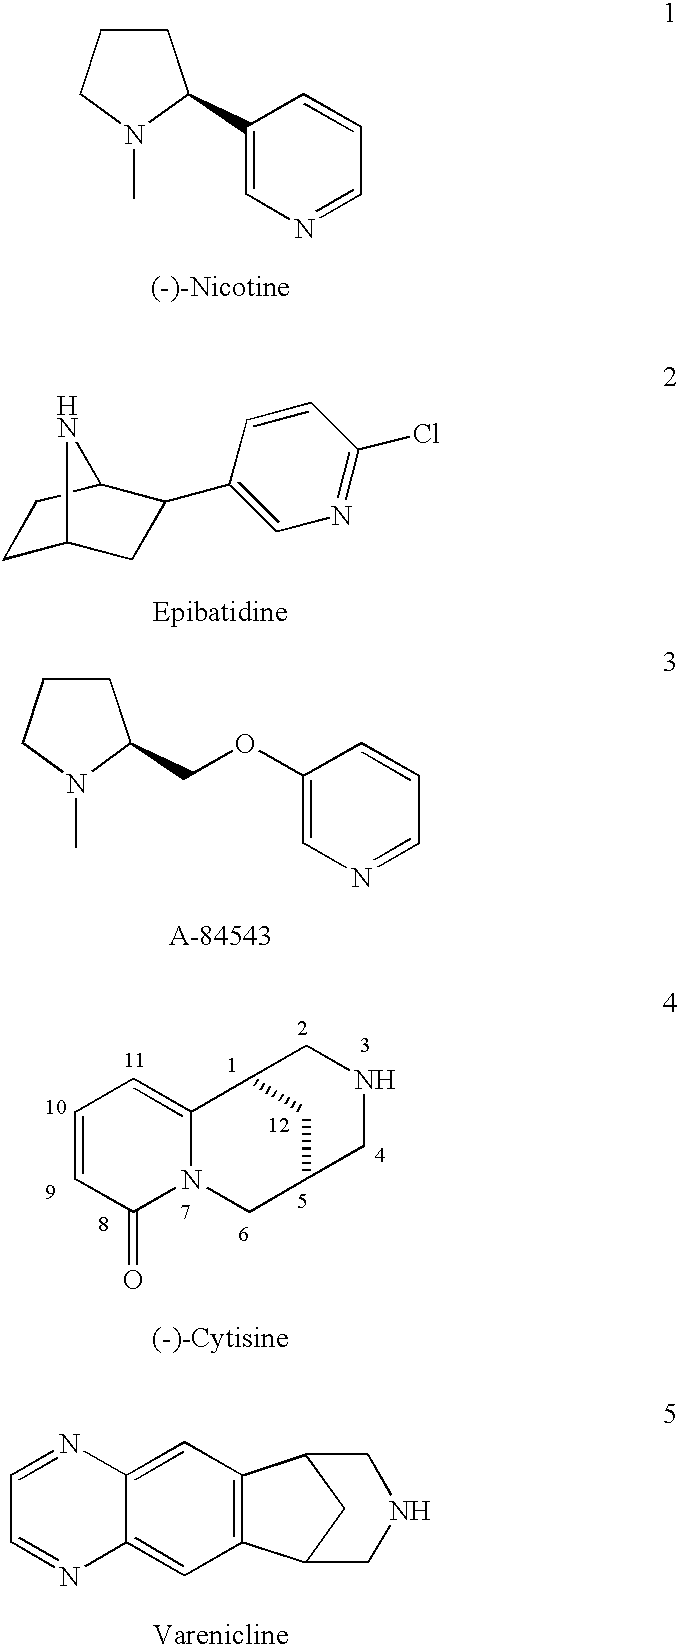 10-Substituted Cytisine Derivatives and Methods of Use Thereof